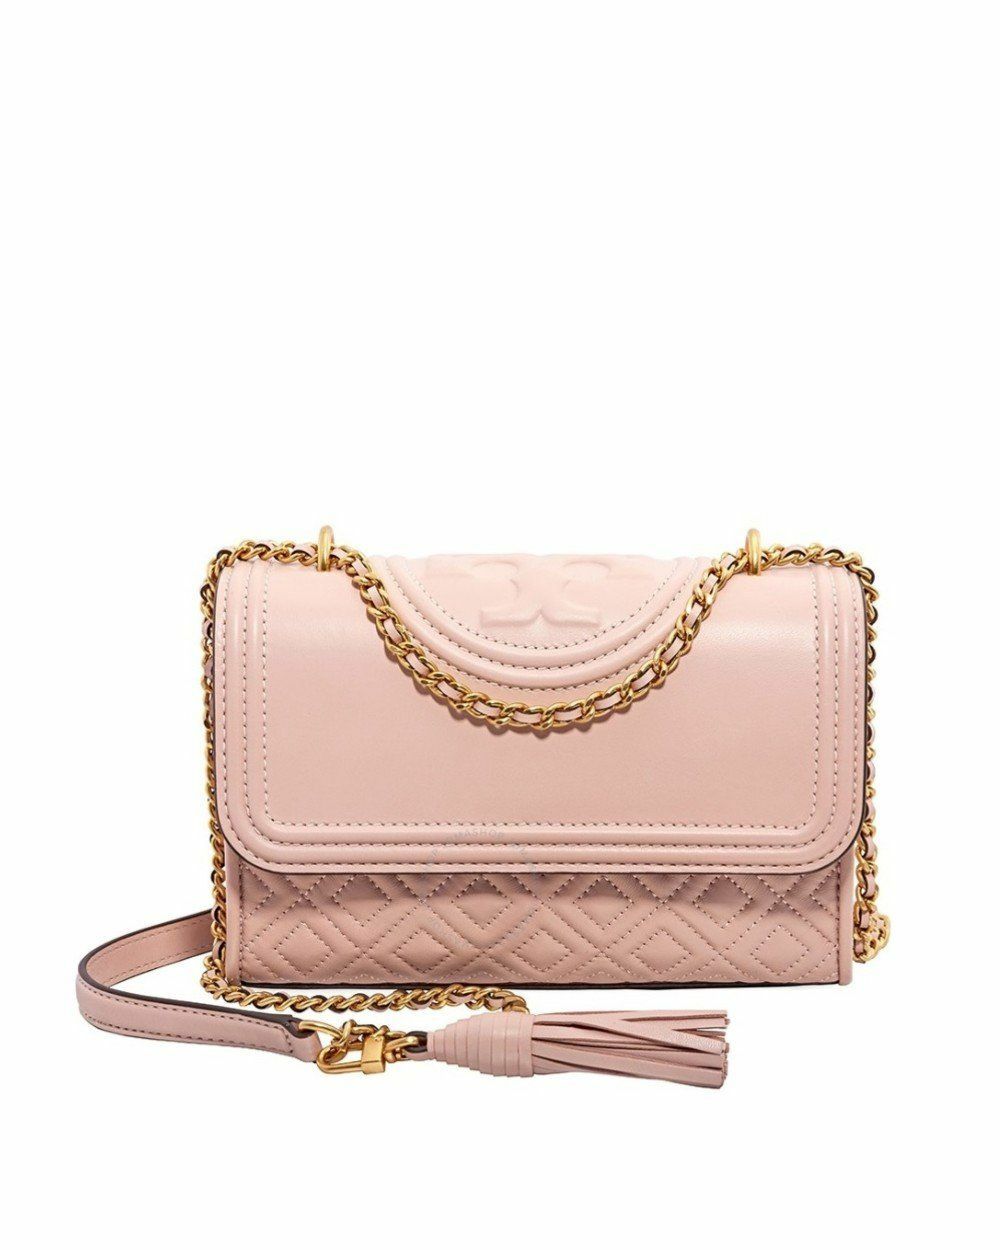 tory-burch-fleming-small-convertible-leather-shoulder-bag--shell-pink-43834-652_1080x.jpg